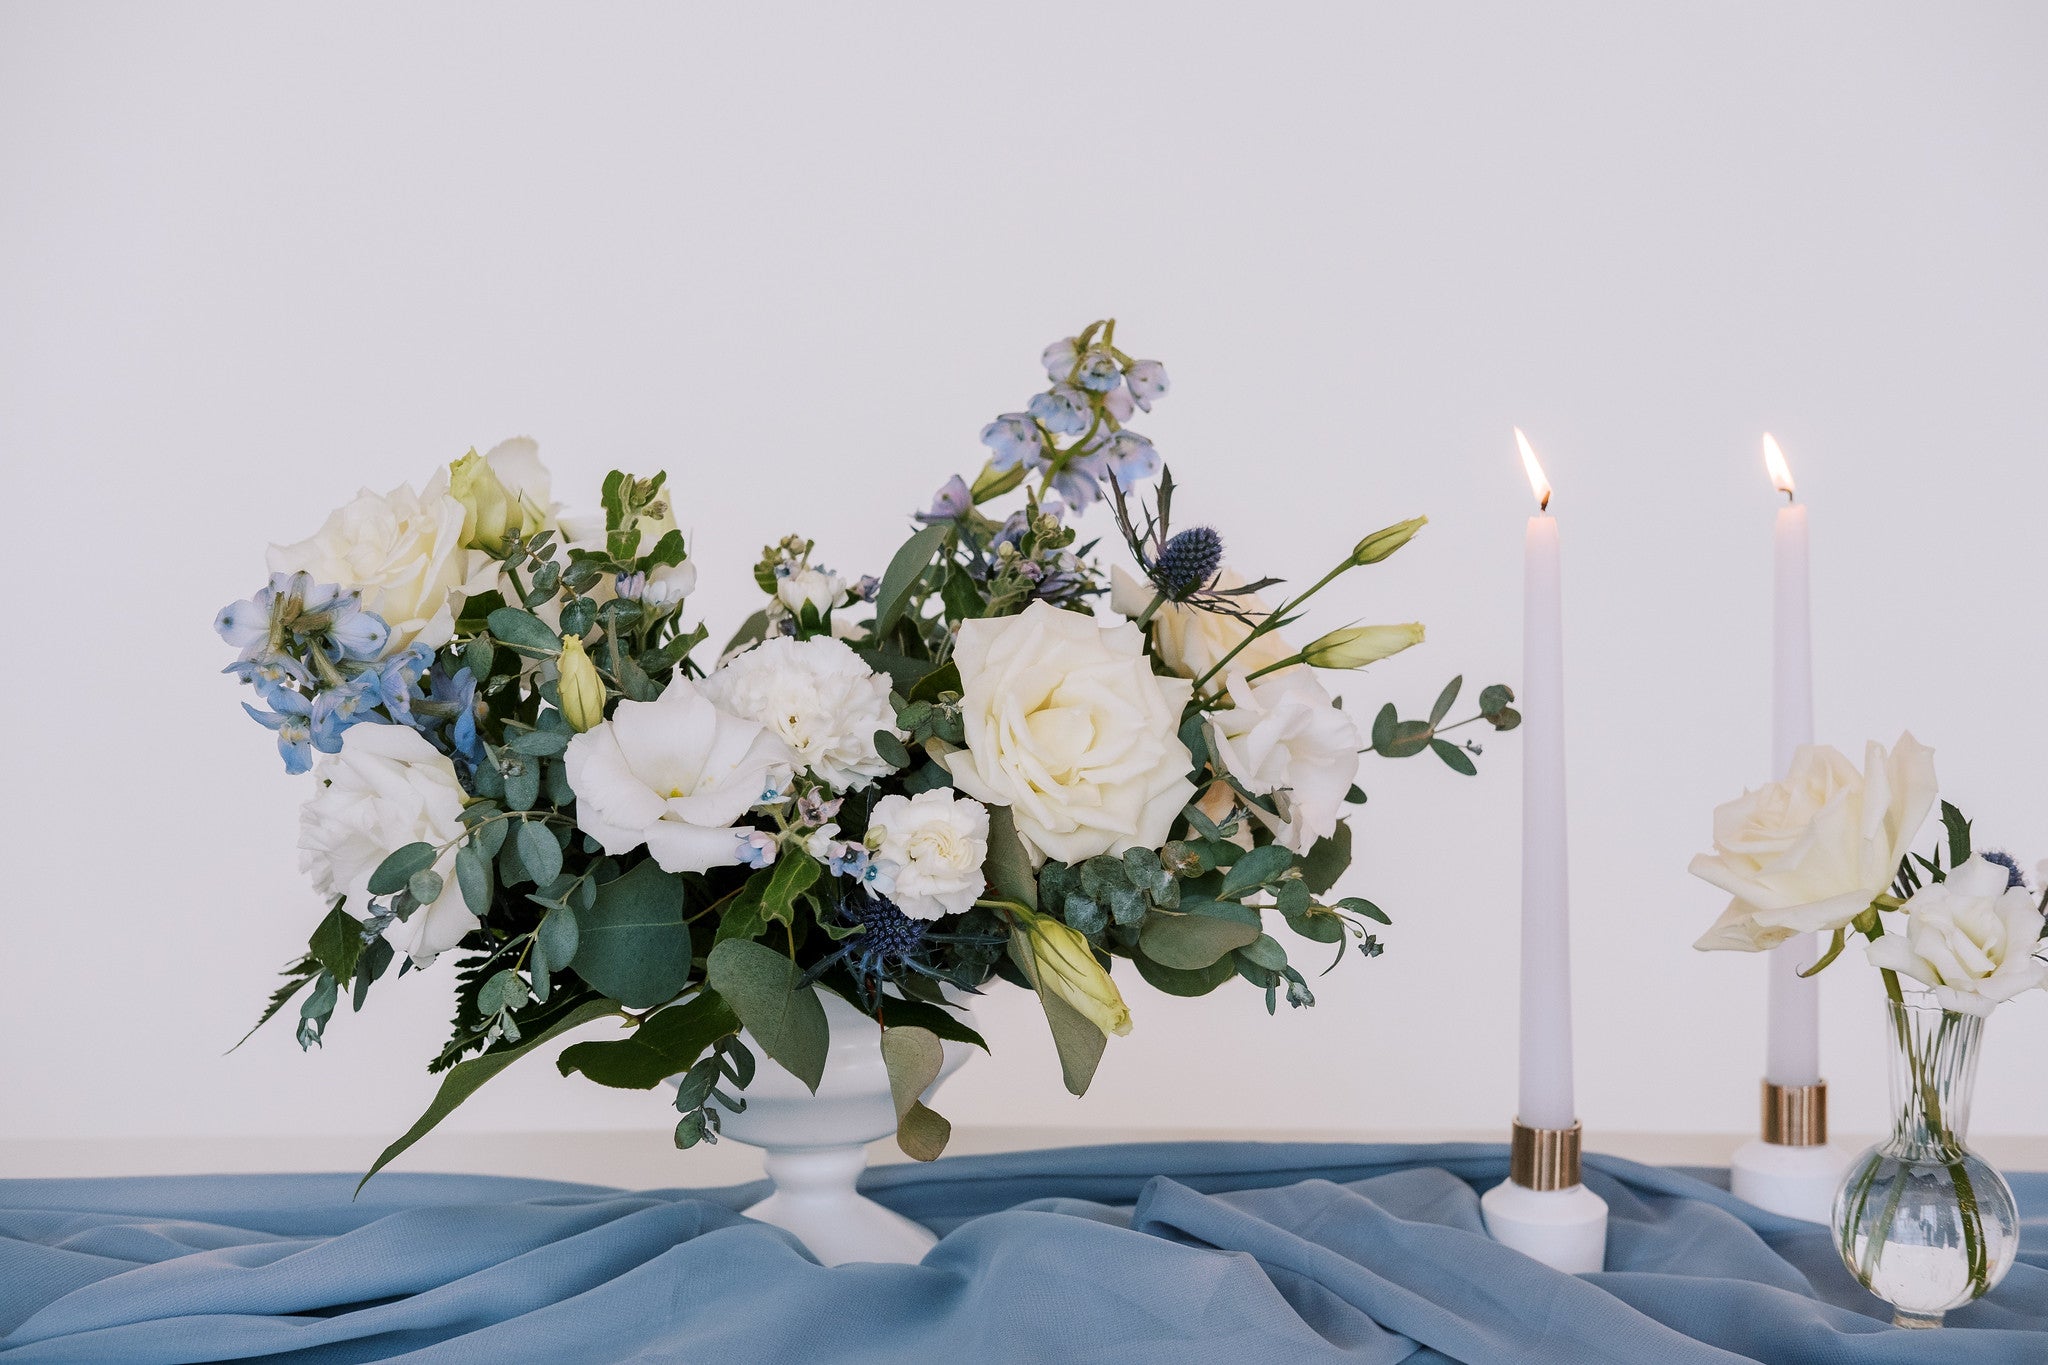 How to Get Blue and Cream Wedding Flowers